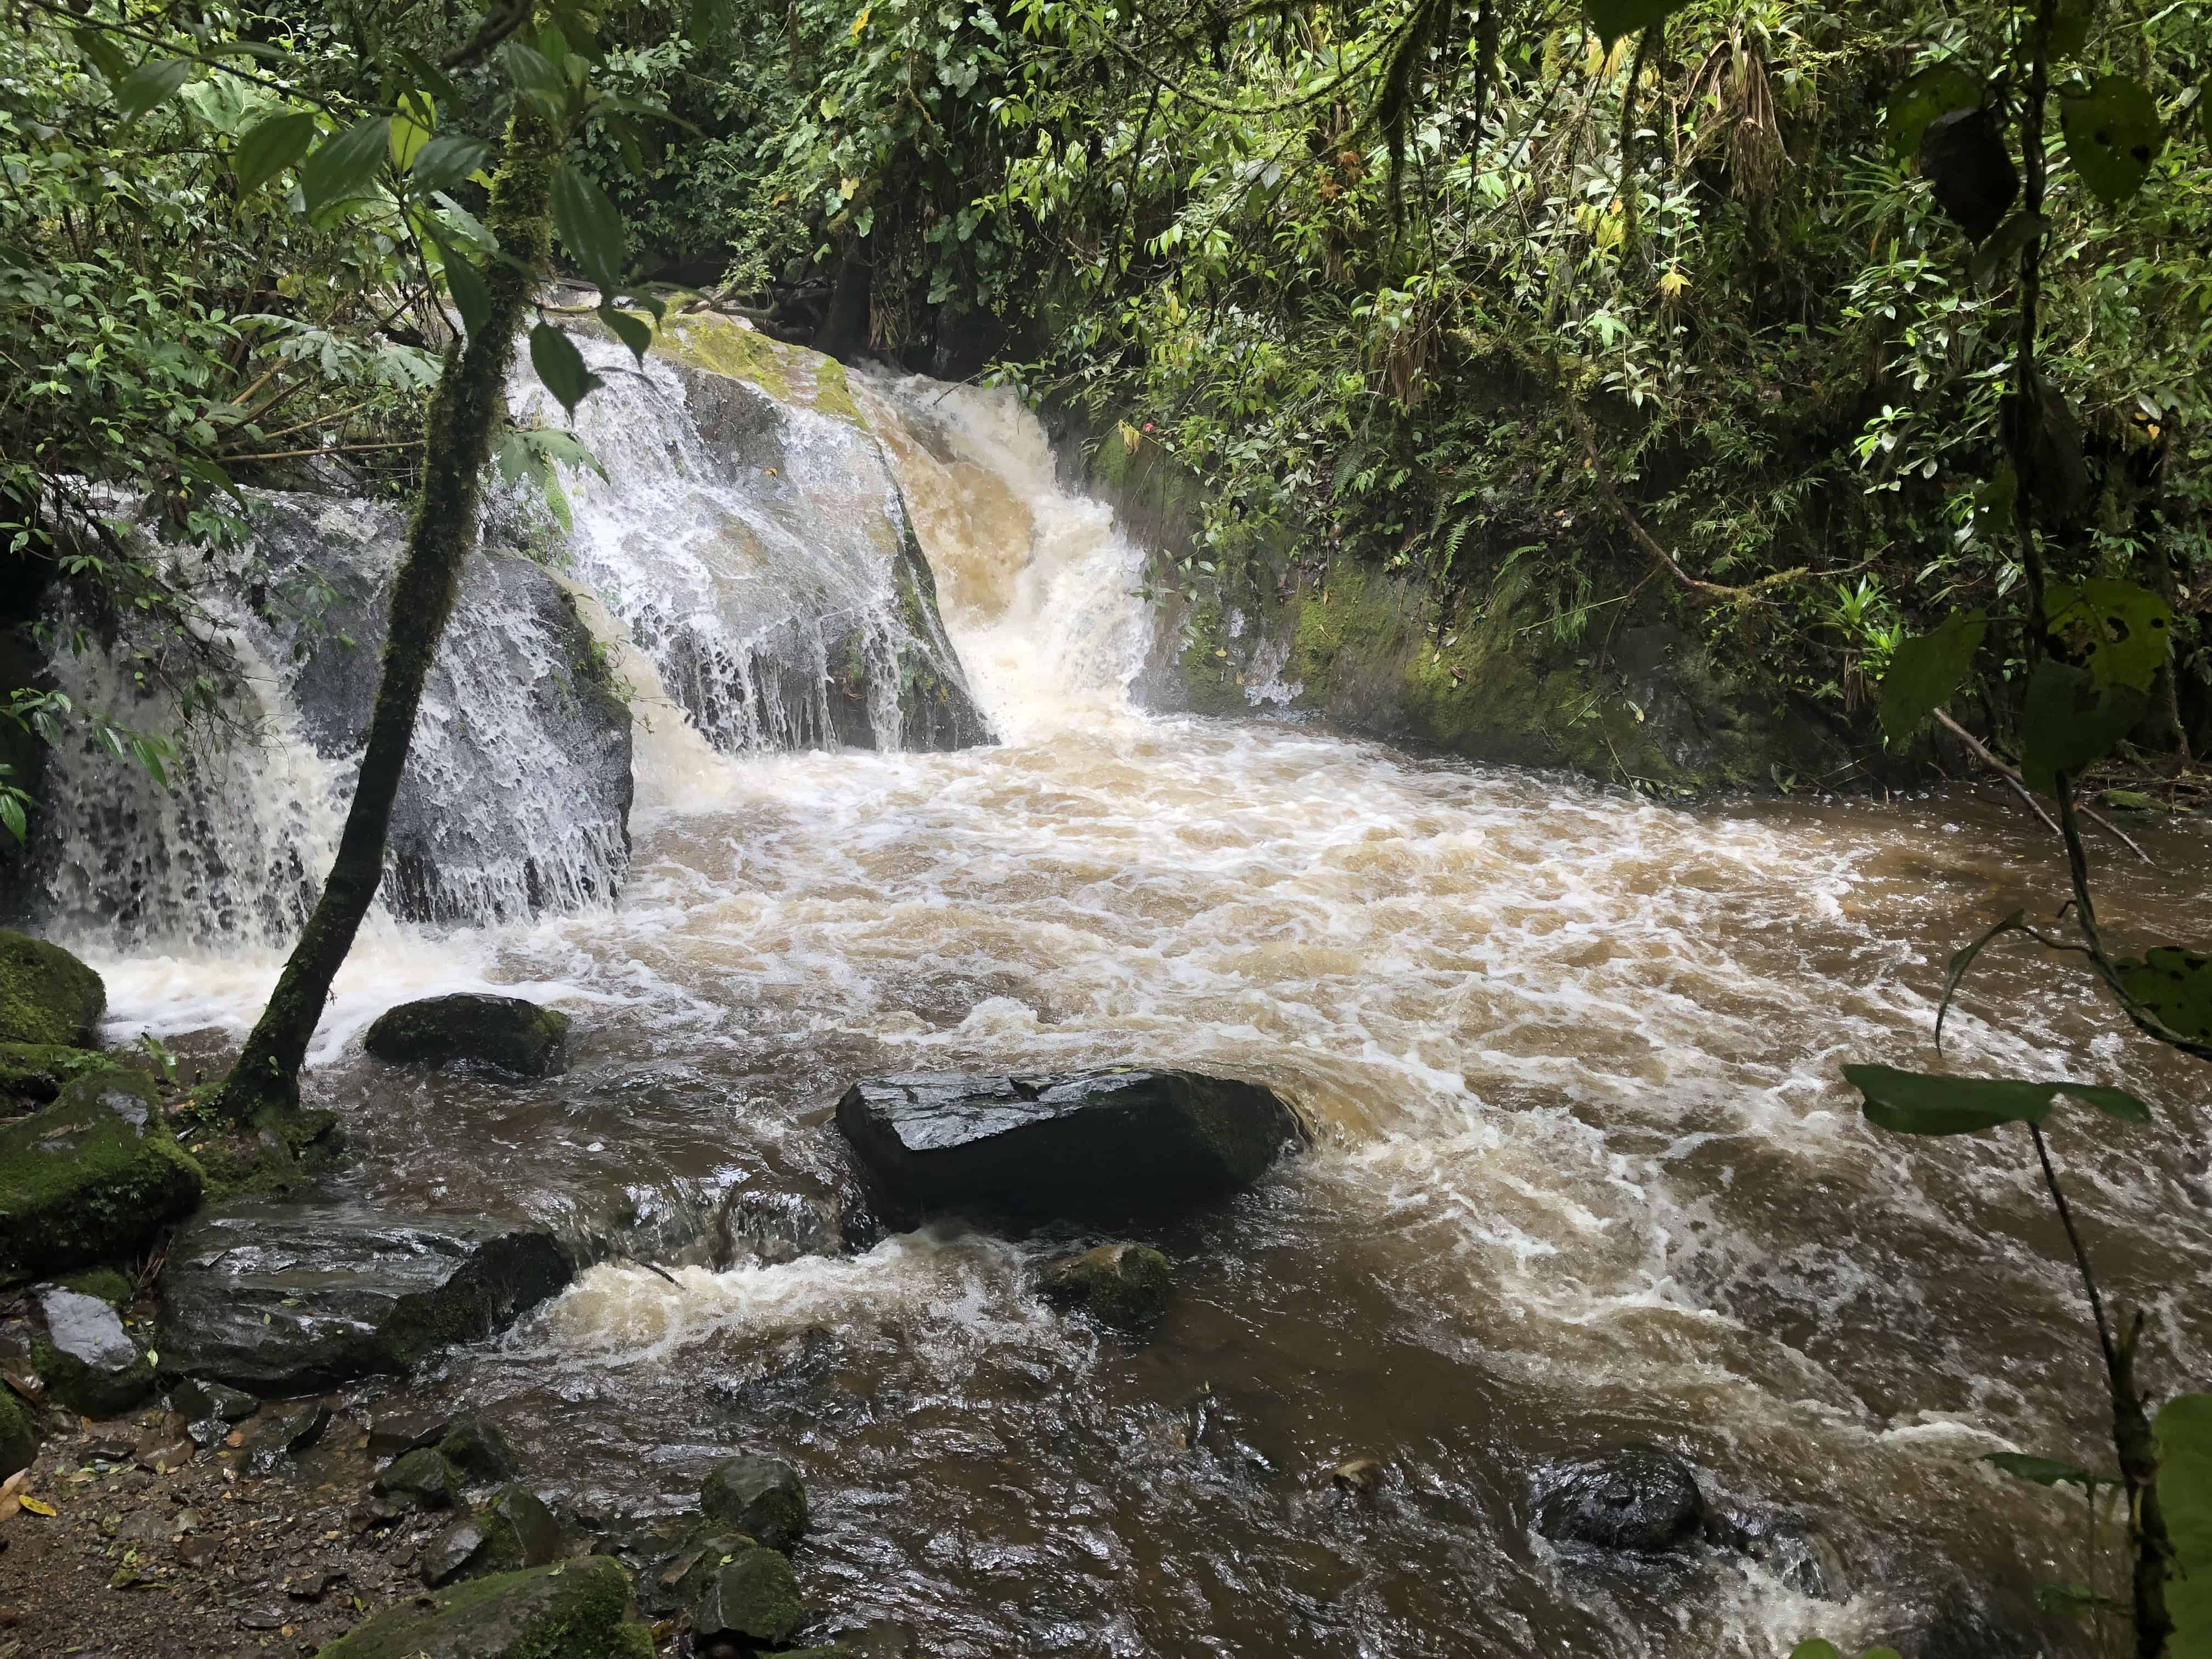 The river at Cocora Valley in Quindío, Colombia